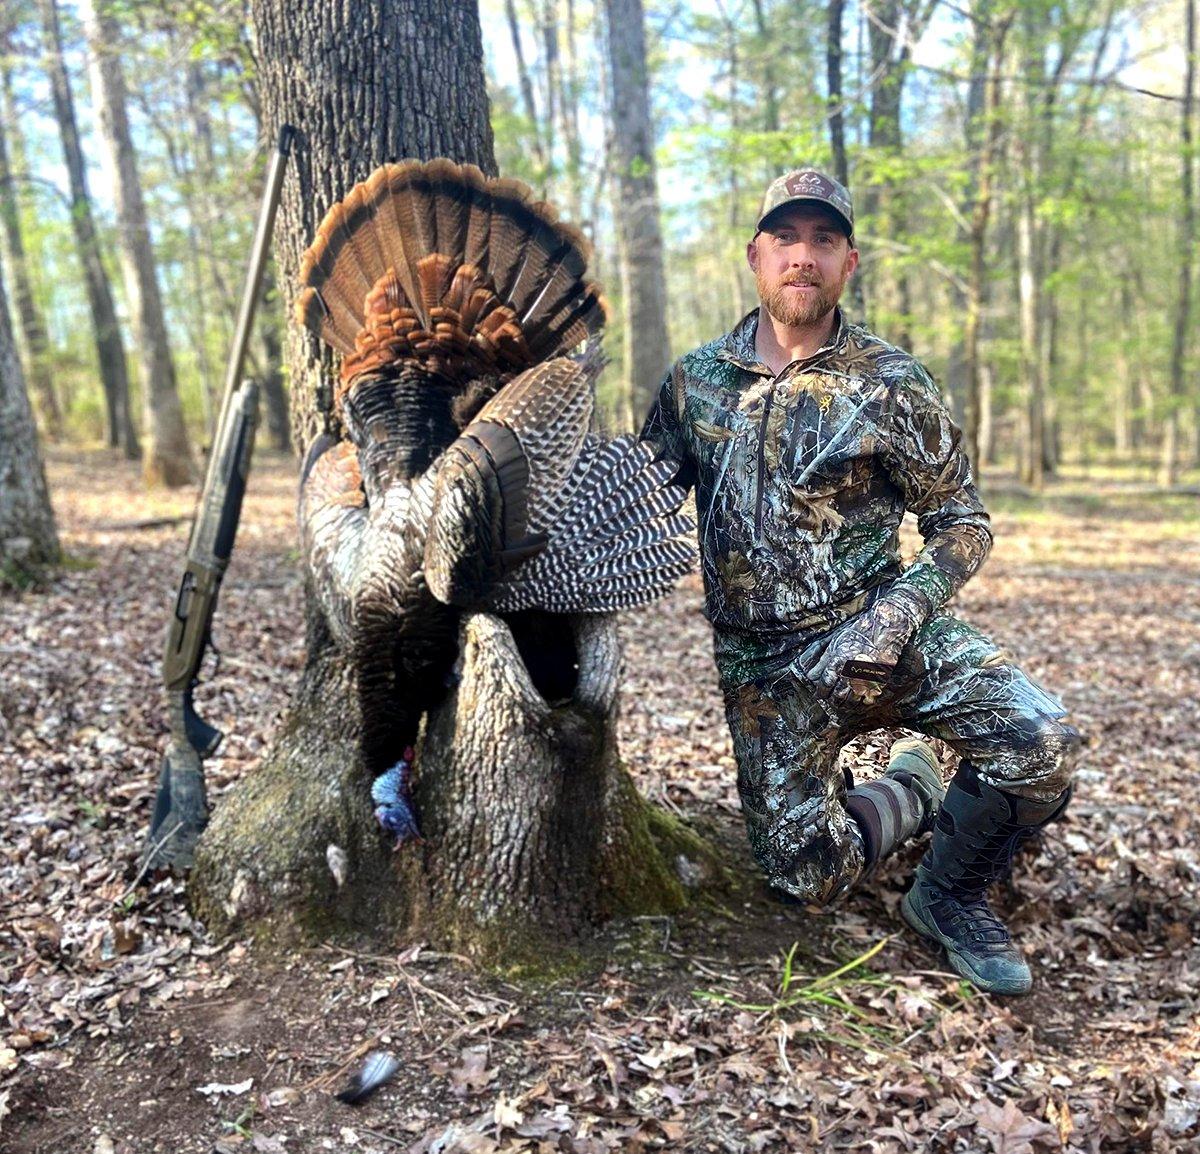 All Things Hunting's Kyle Barefield poses with his Louisiana longbeard. Image by All Things Hunting